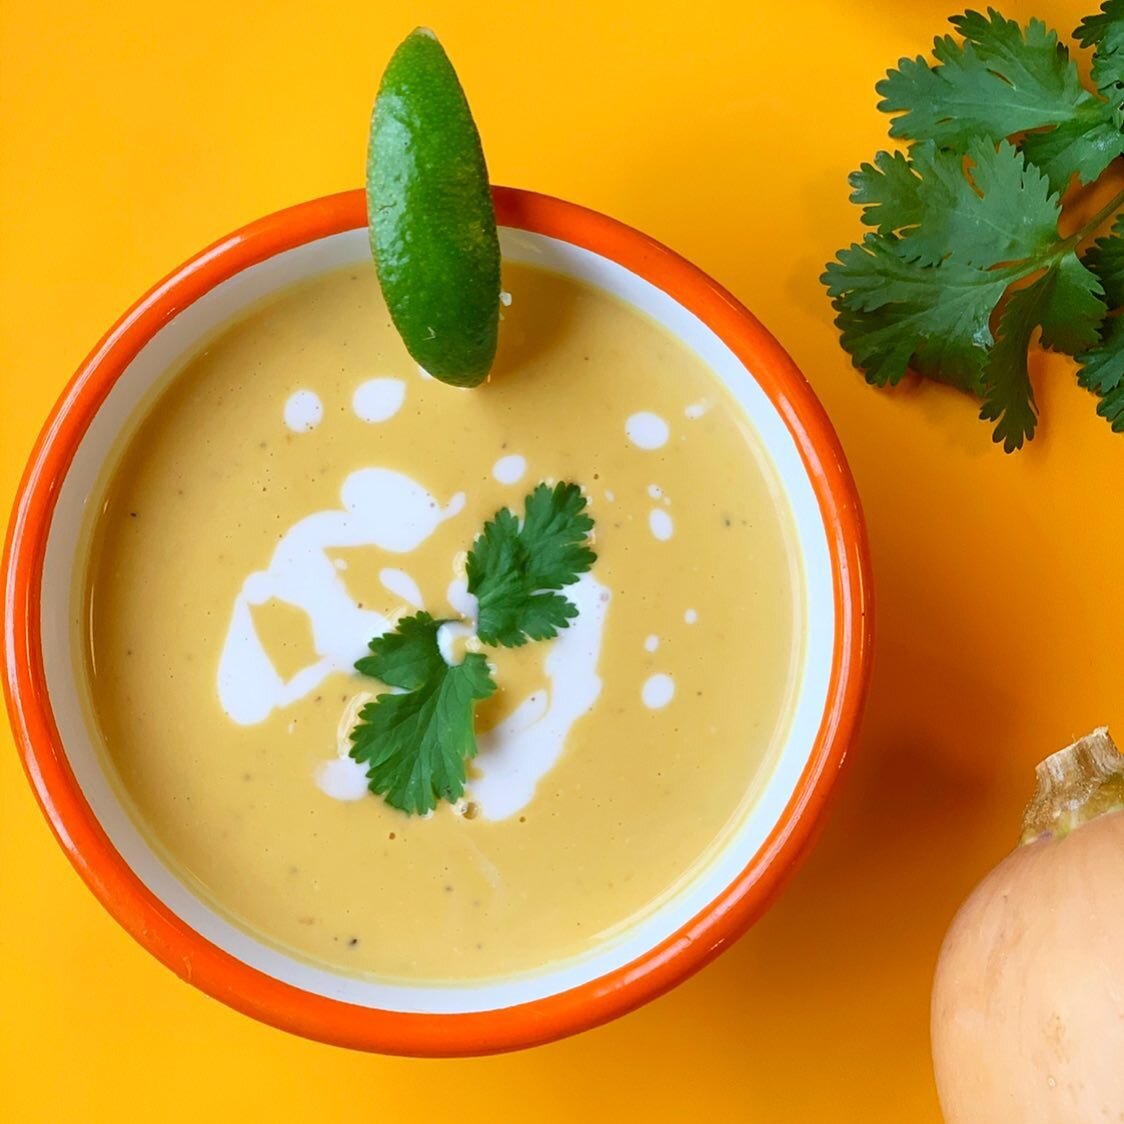 It&rsquo;s back! It&rsquo;s back! Our butternut squash soup is back!

Fall flavors are some of our favorite, and this soup is no exception. Rich butternut squash, creamy coconut milk, and freshly grated ginger for the perfect amount of kick. Availabl